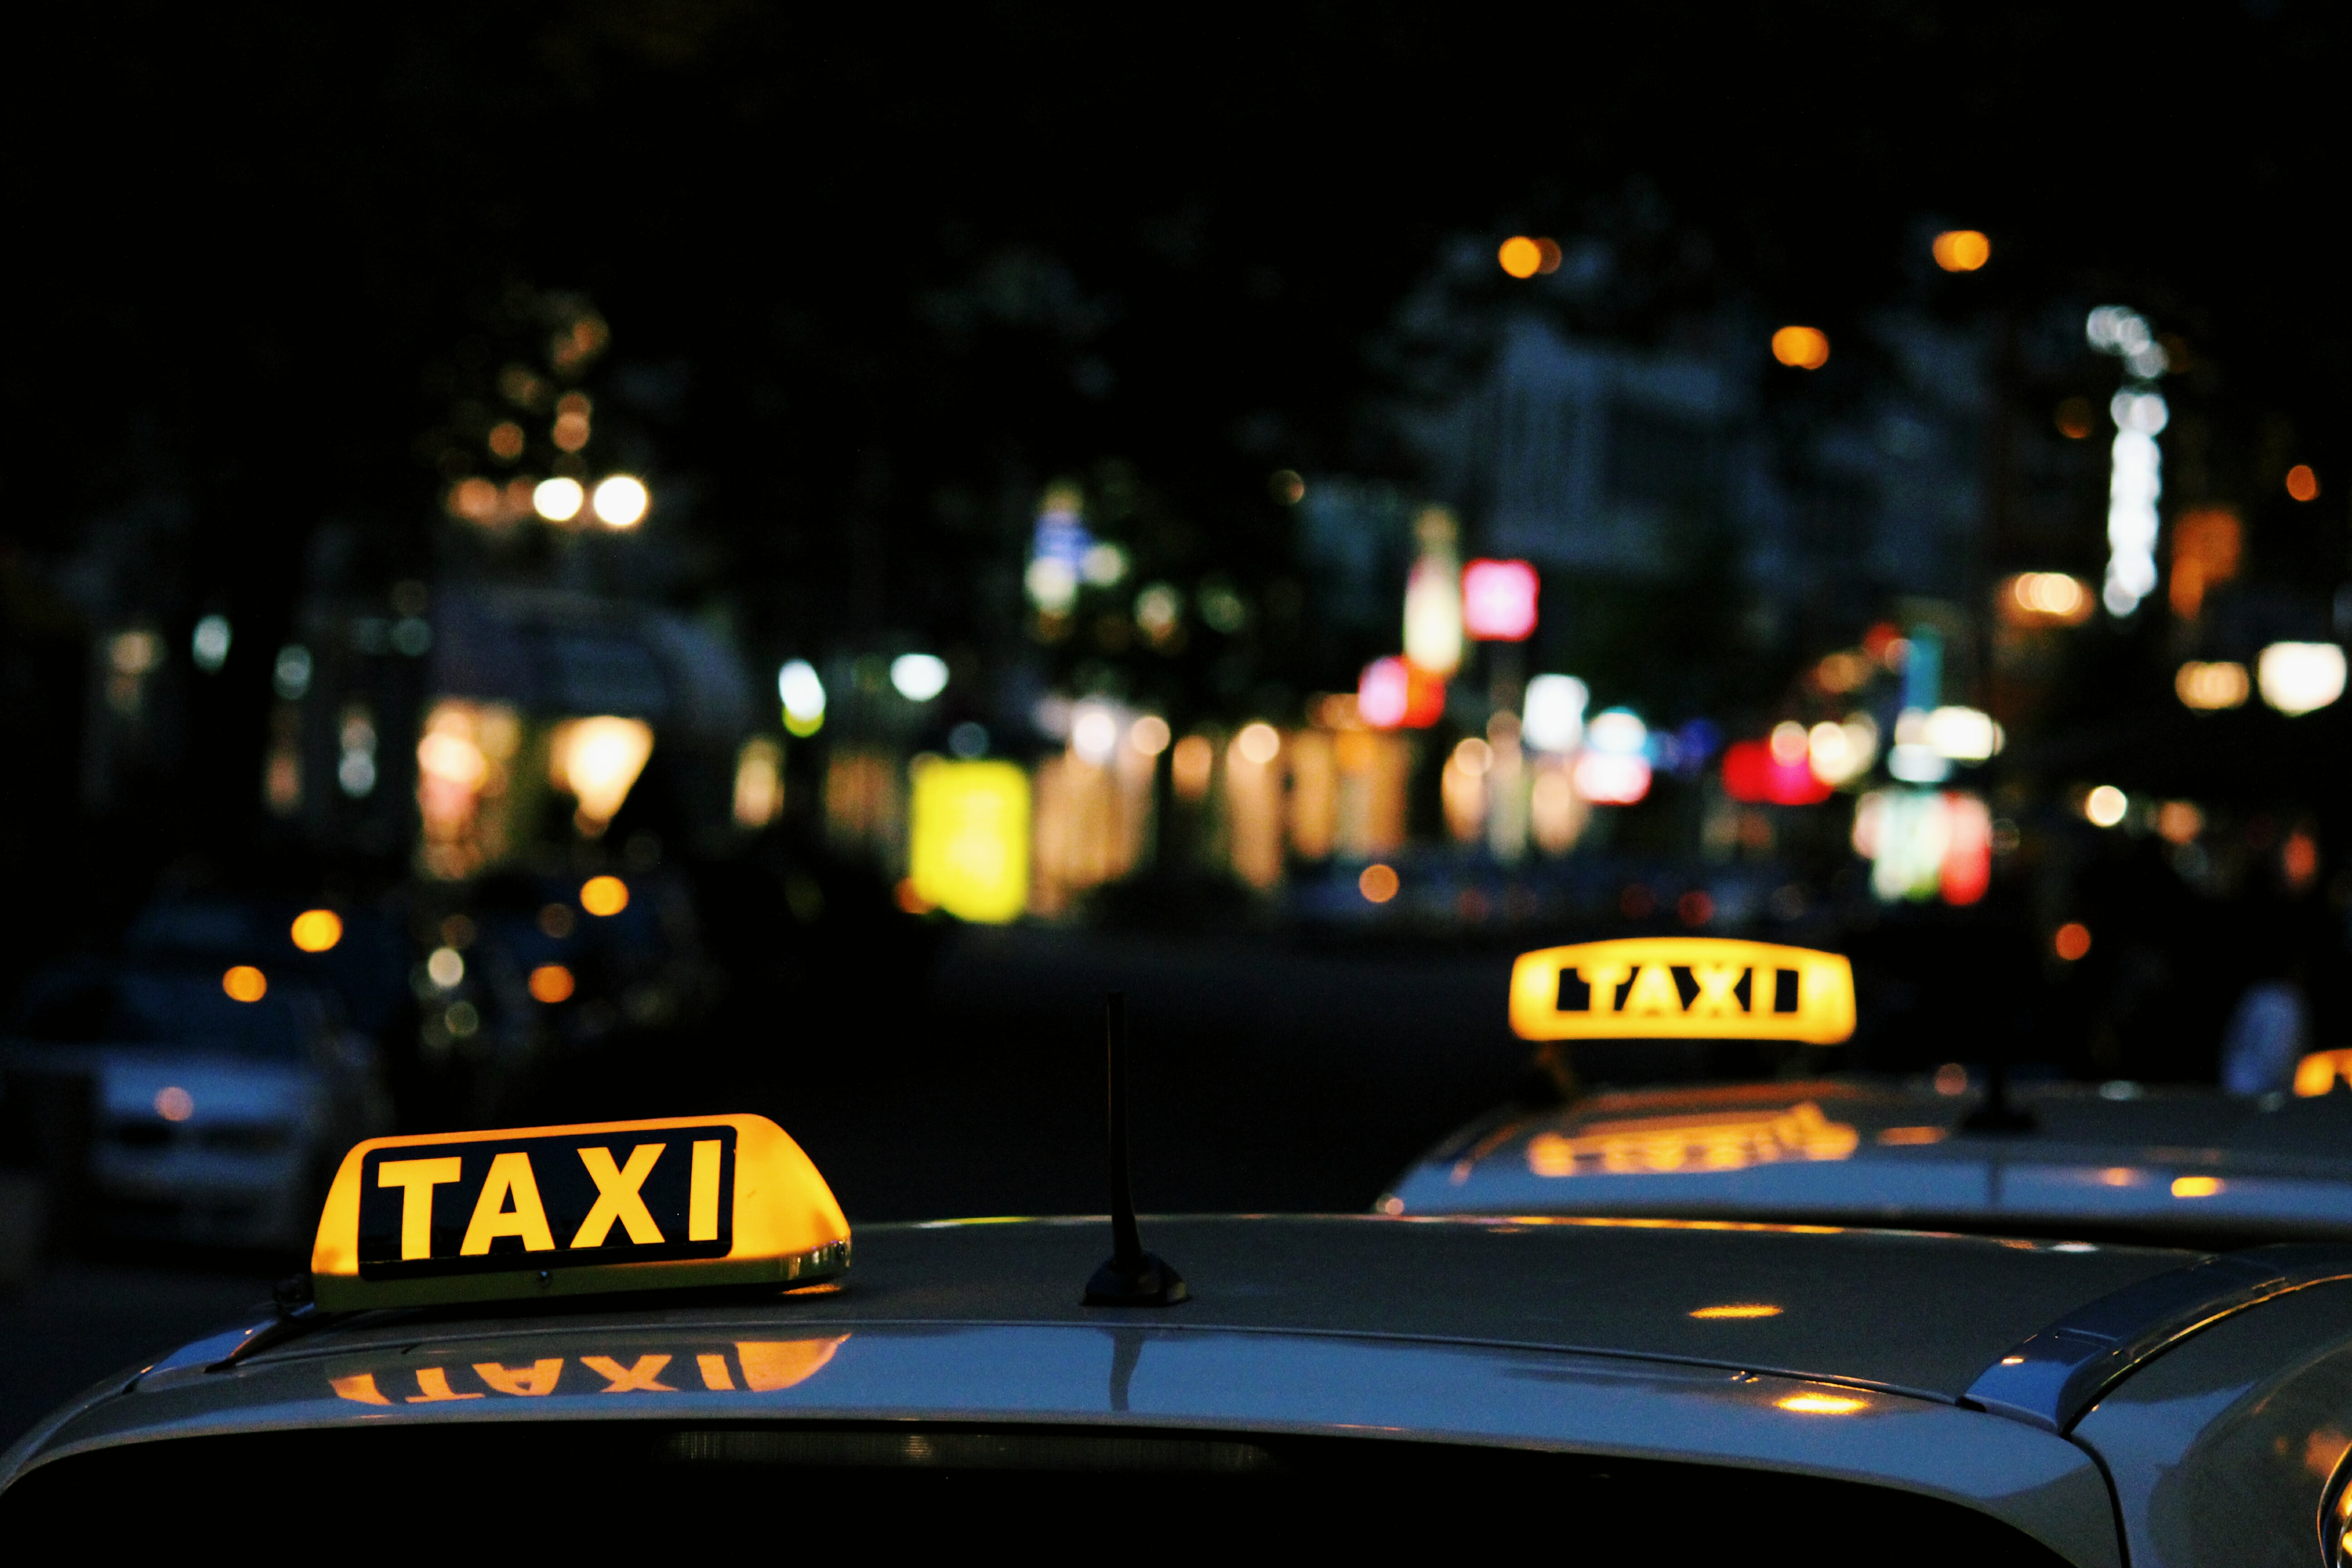 plan-would-add-30-per-ride-to-pay-for-accessible-taxis-published-2014